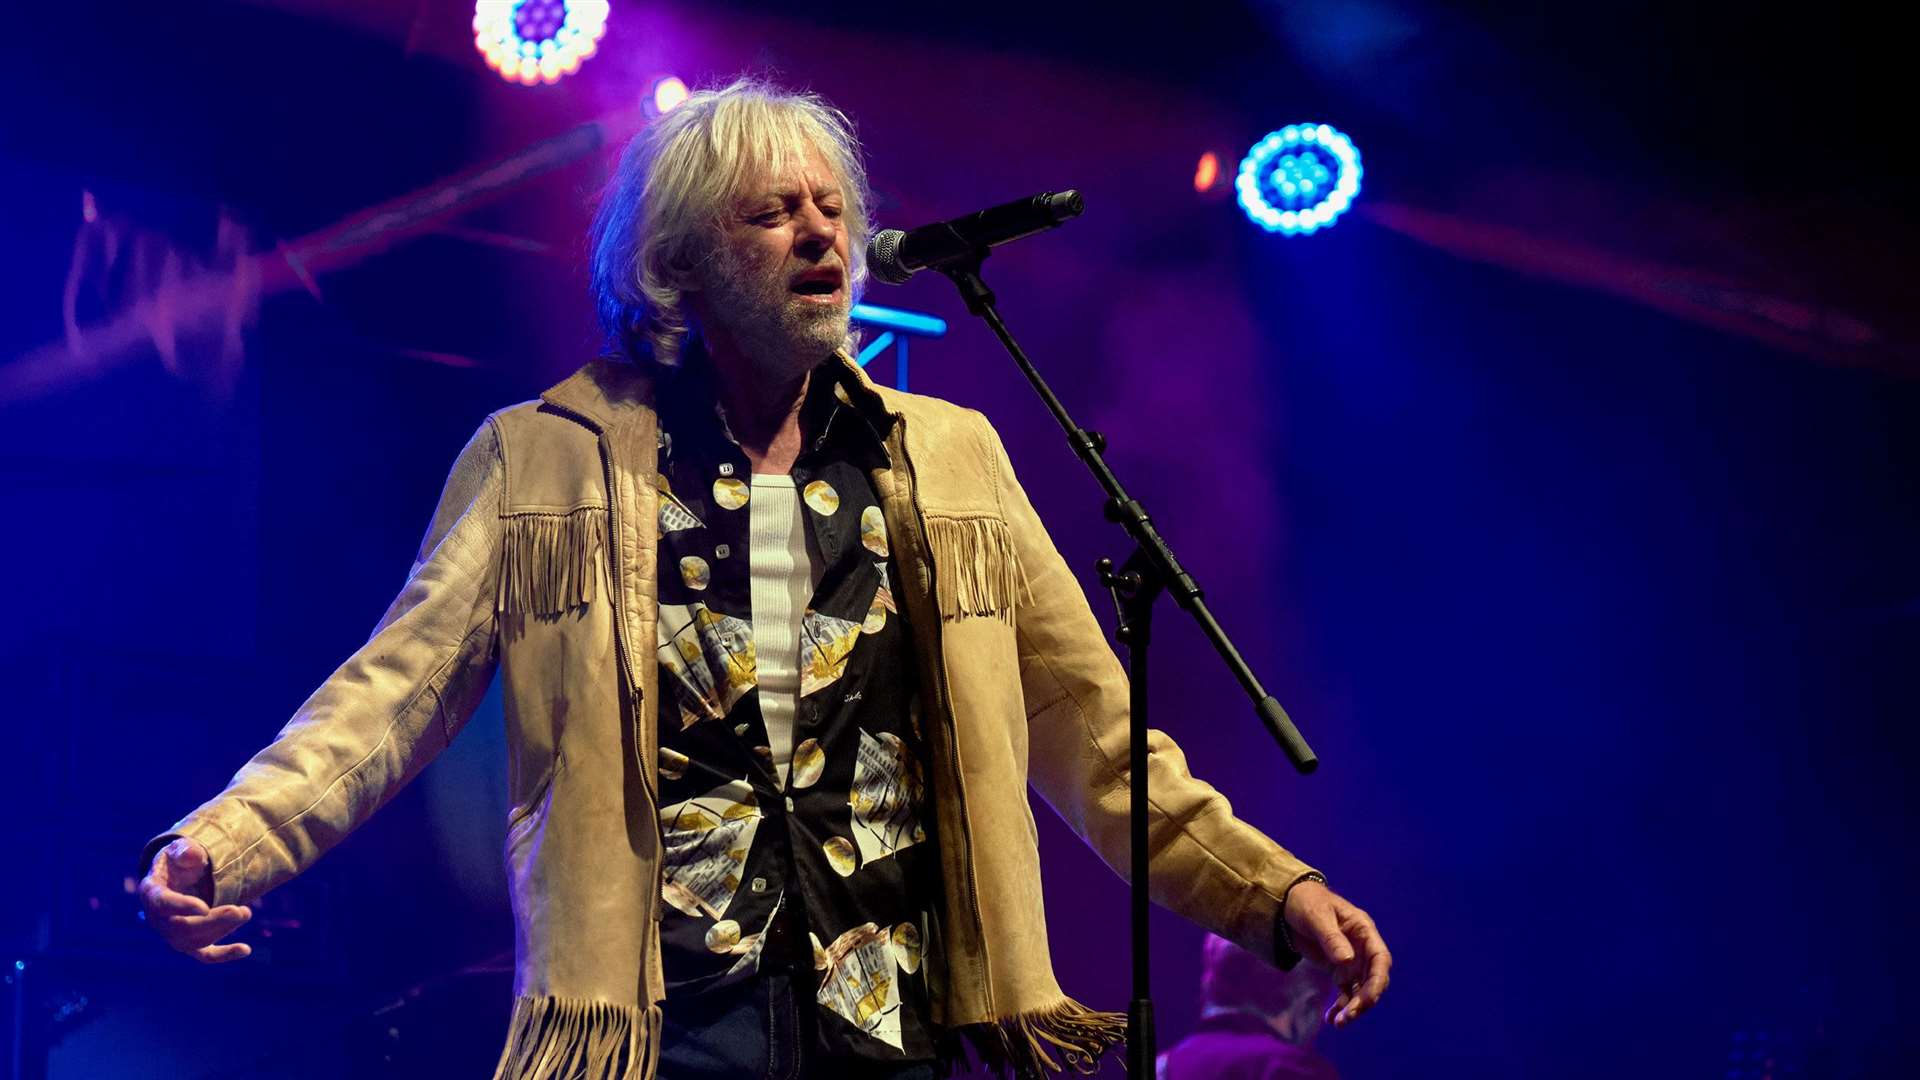 Mr Geldof was paying tribute to a former bandmate in The Boomtown Rats